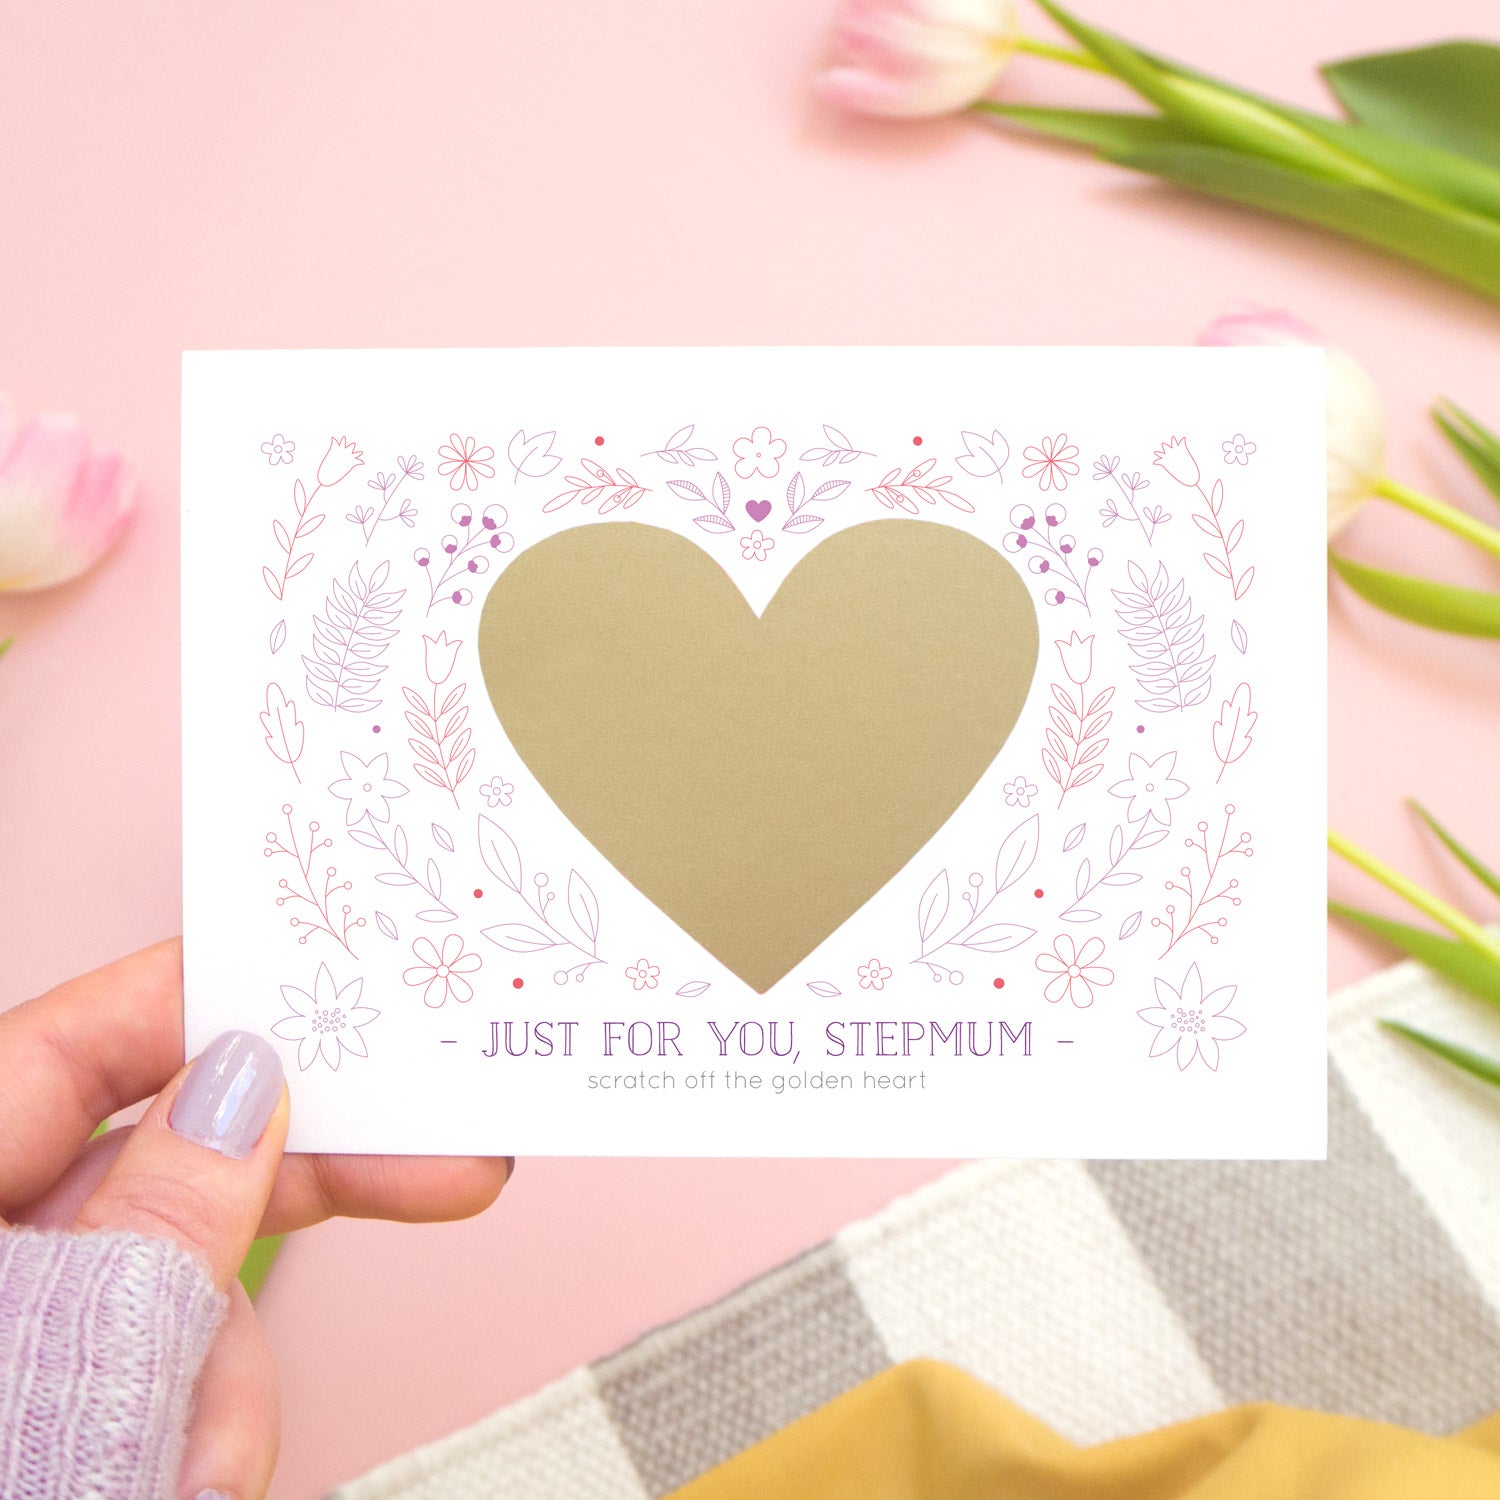 A personalised just for you stepmum scratch card showing how the card looks before the golden heart is scratched off to reveal the message. Shot on a pink background with tulips.